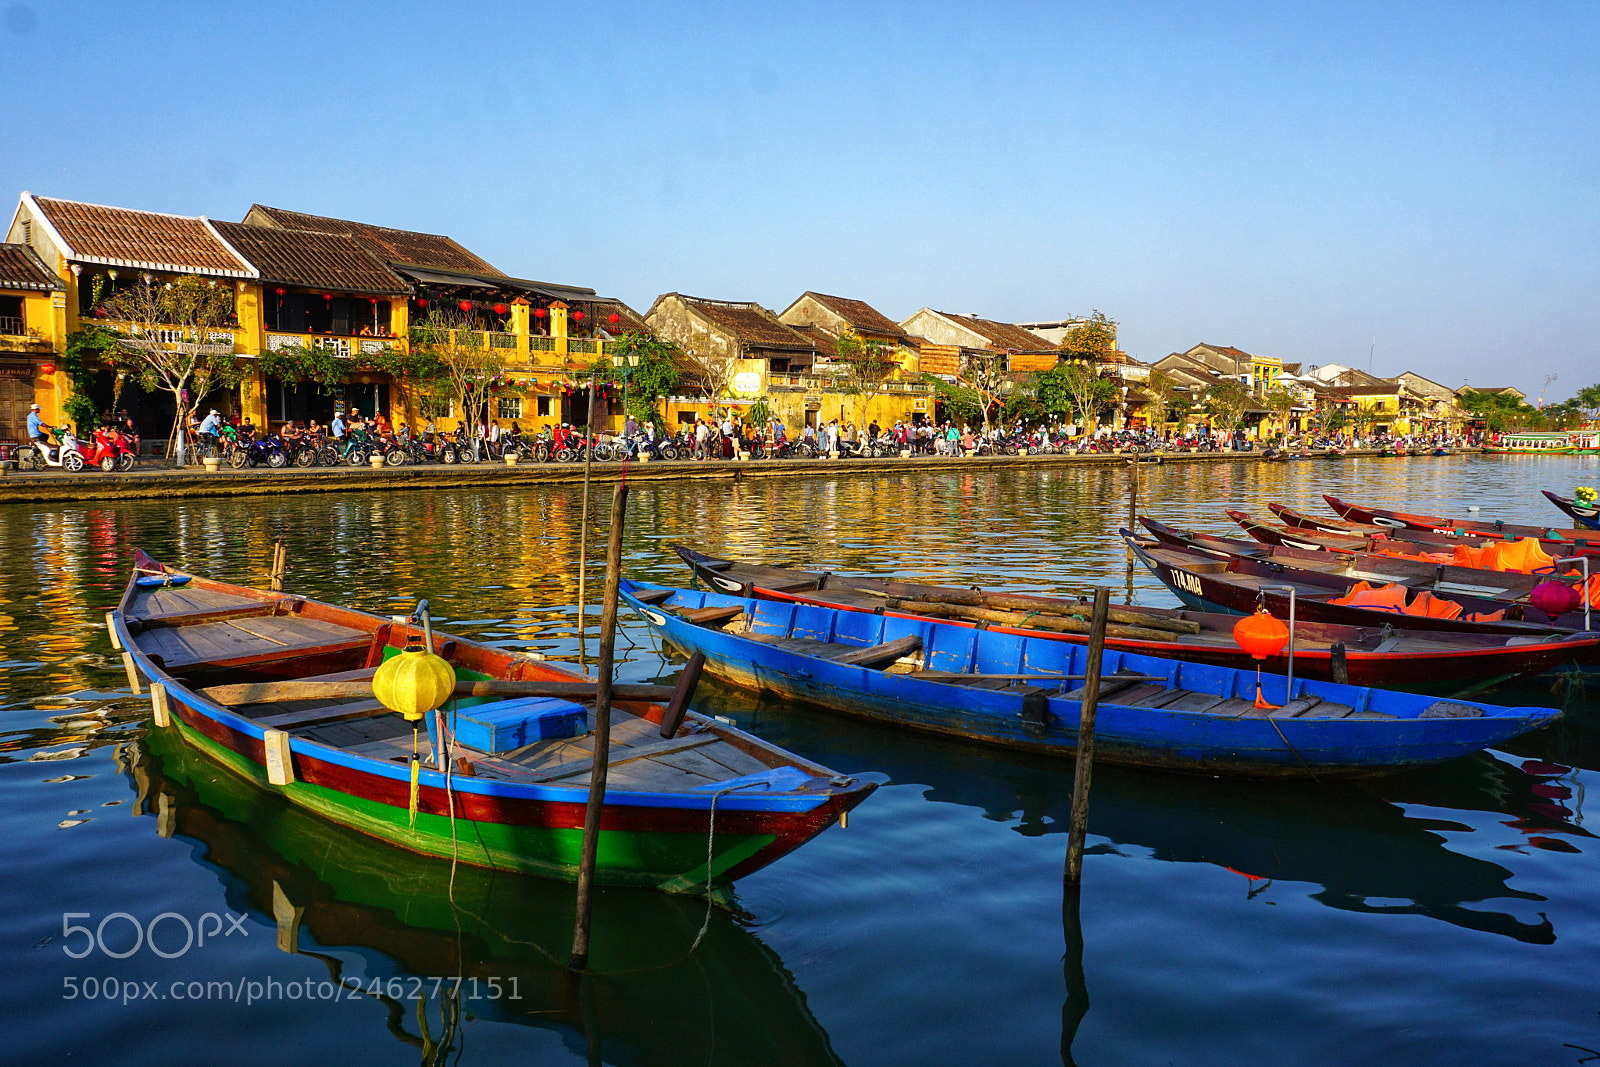 Sony a6000 sample photo. Hoi an ancent town photography